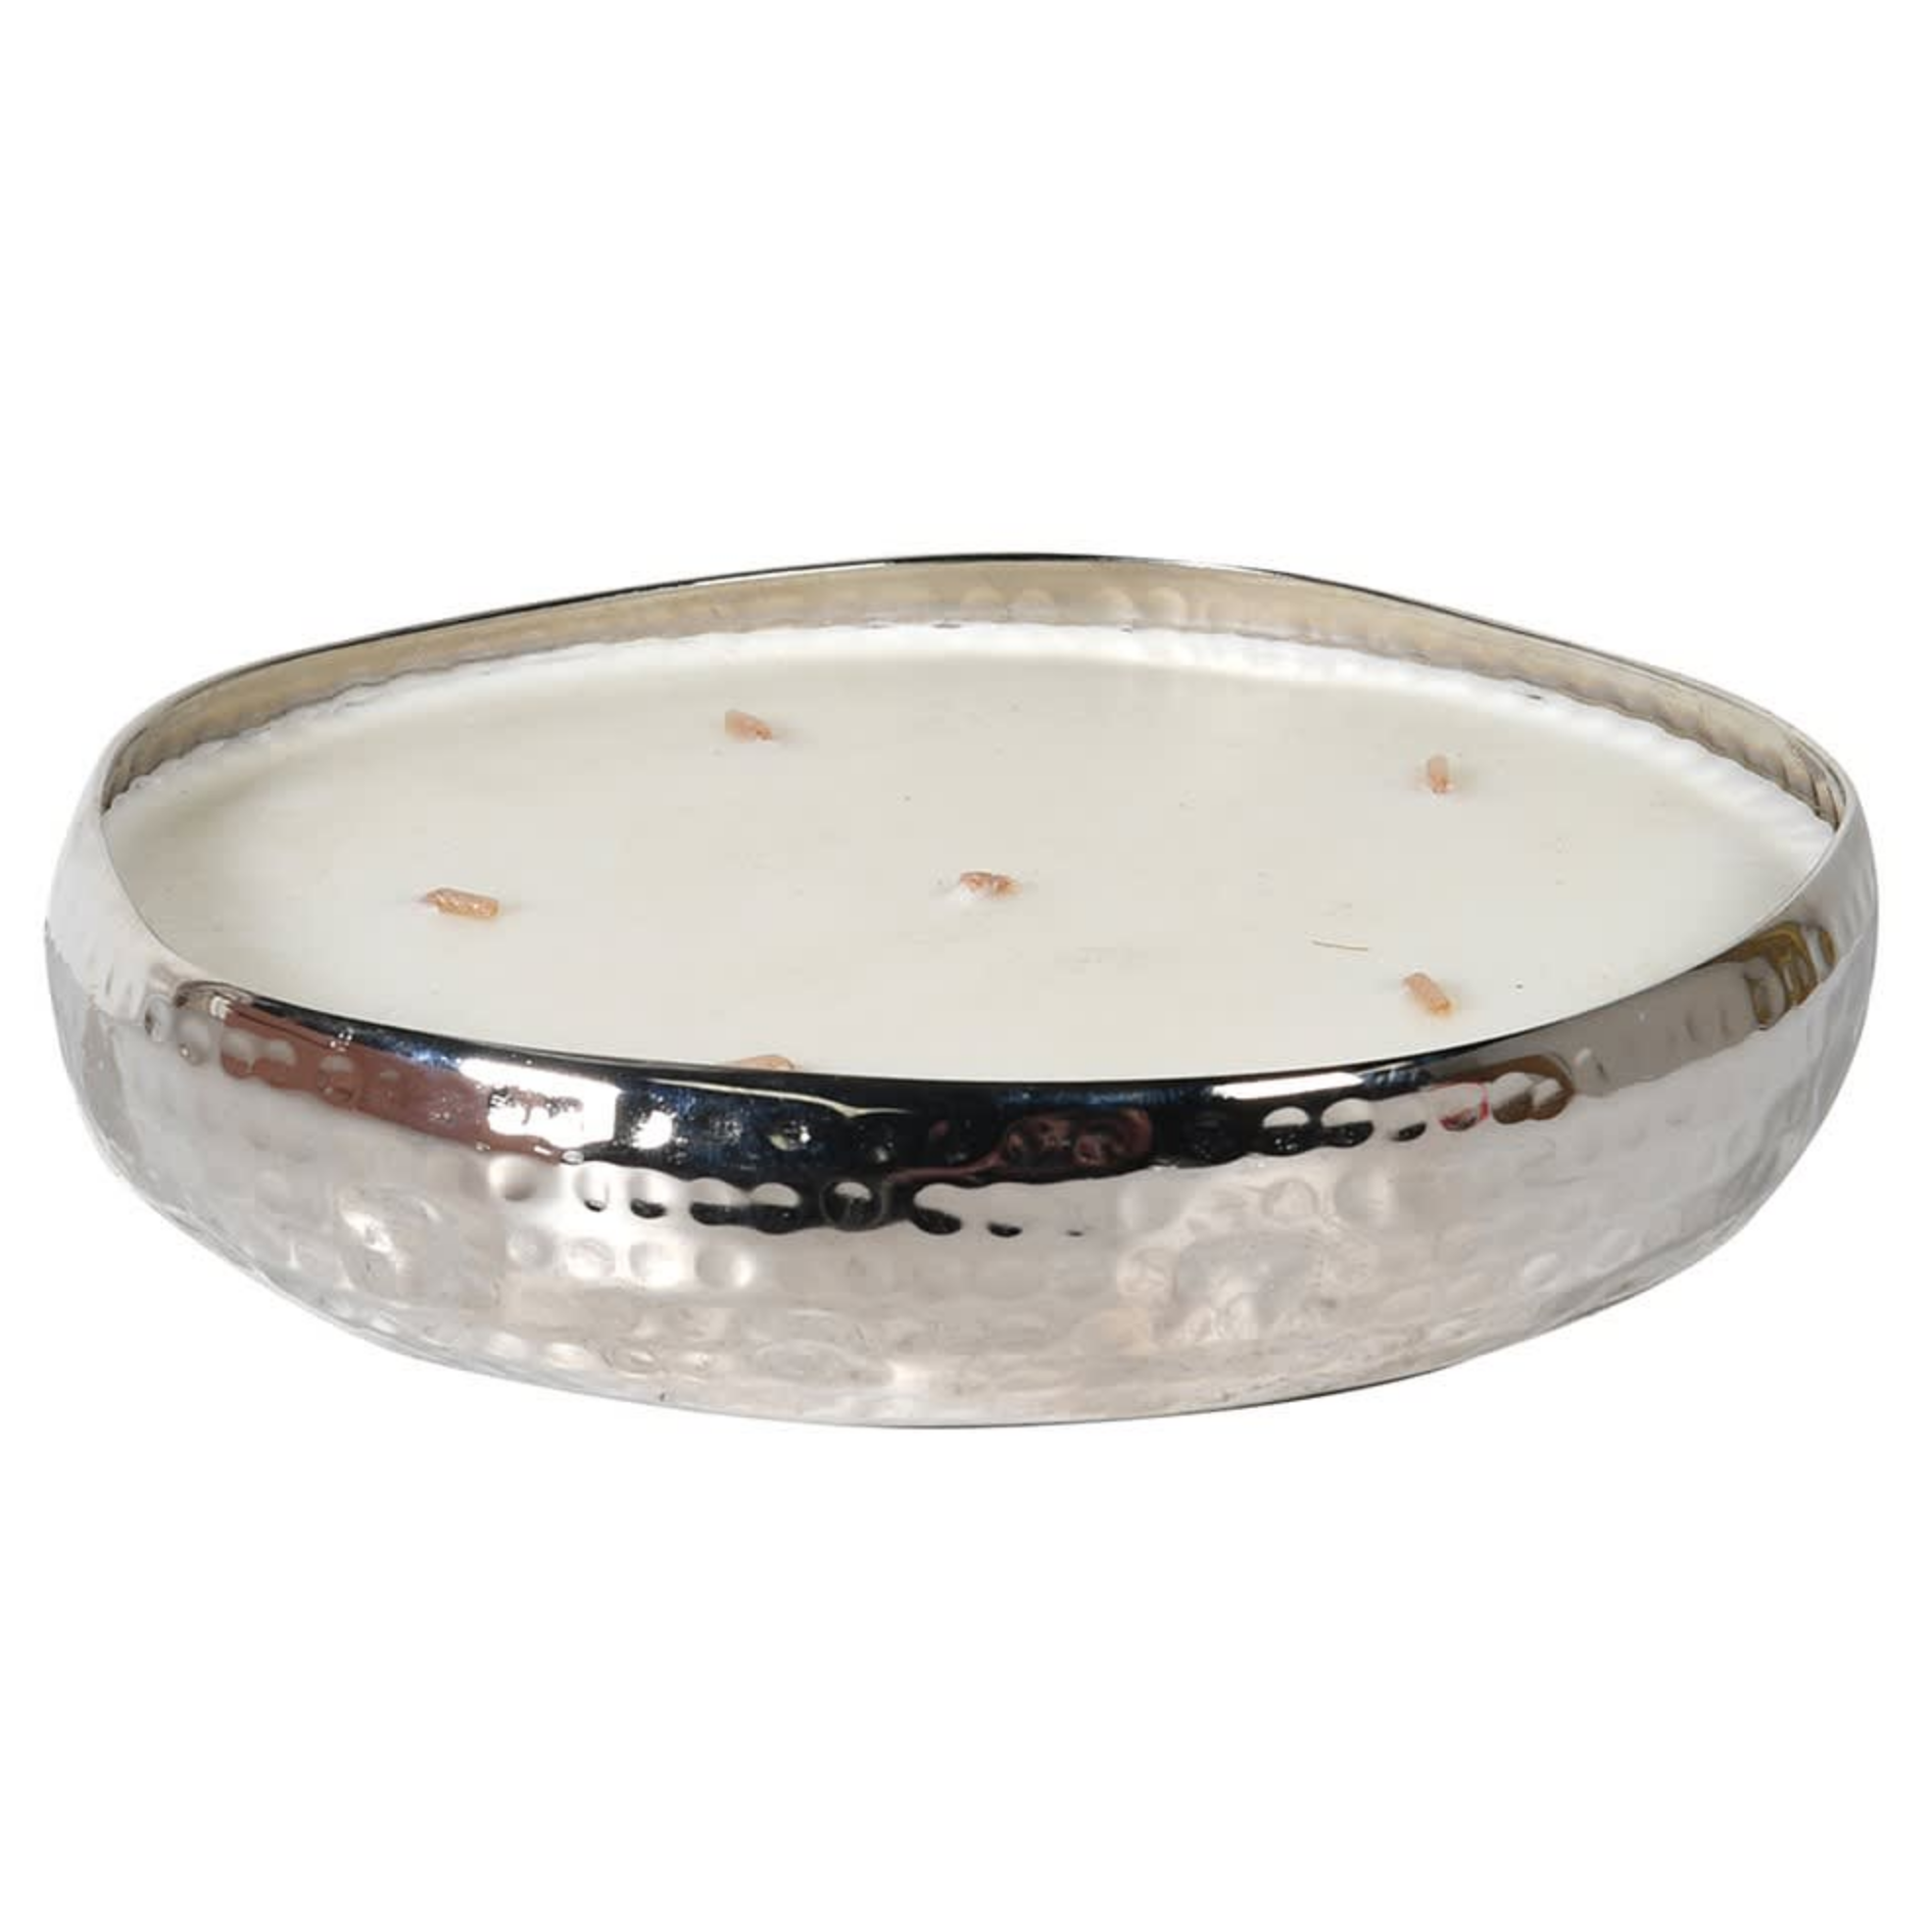 Small 6 Wick Scented Candle in Hammered Silver Dish | Tuberose